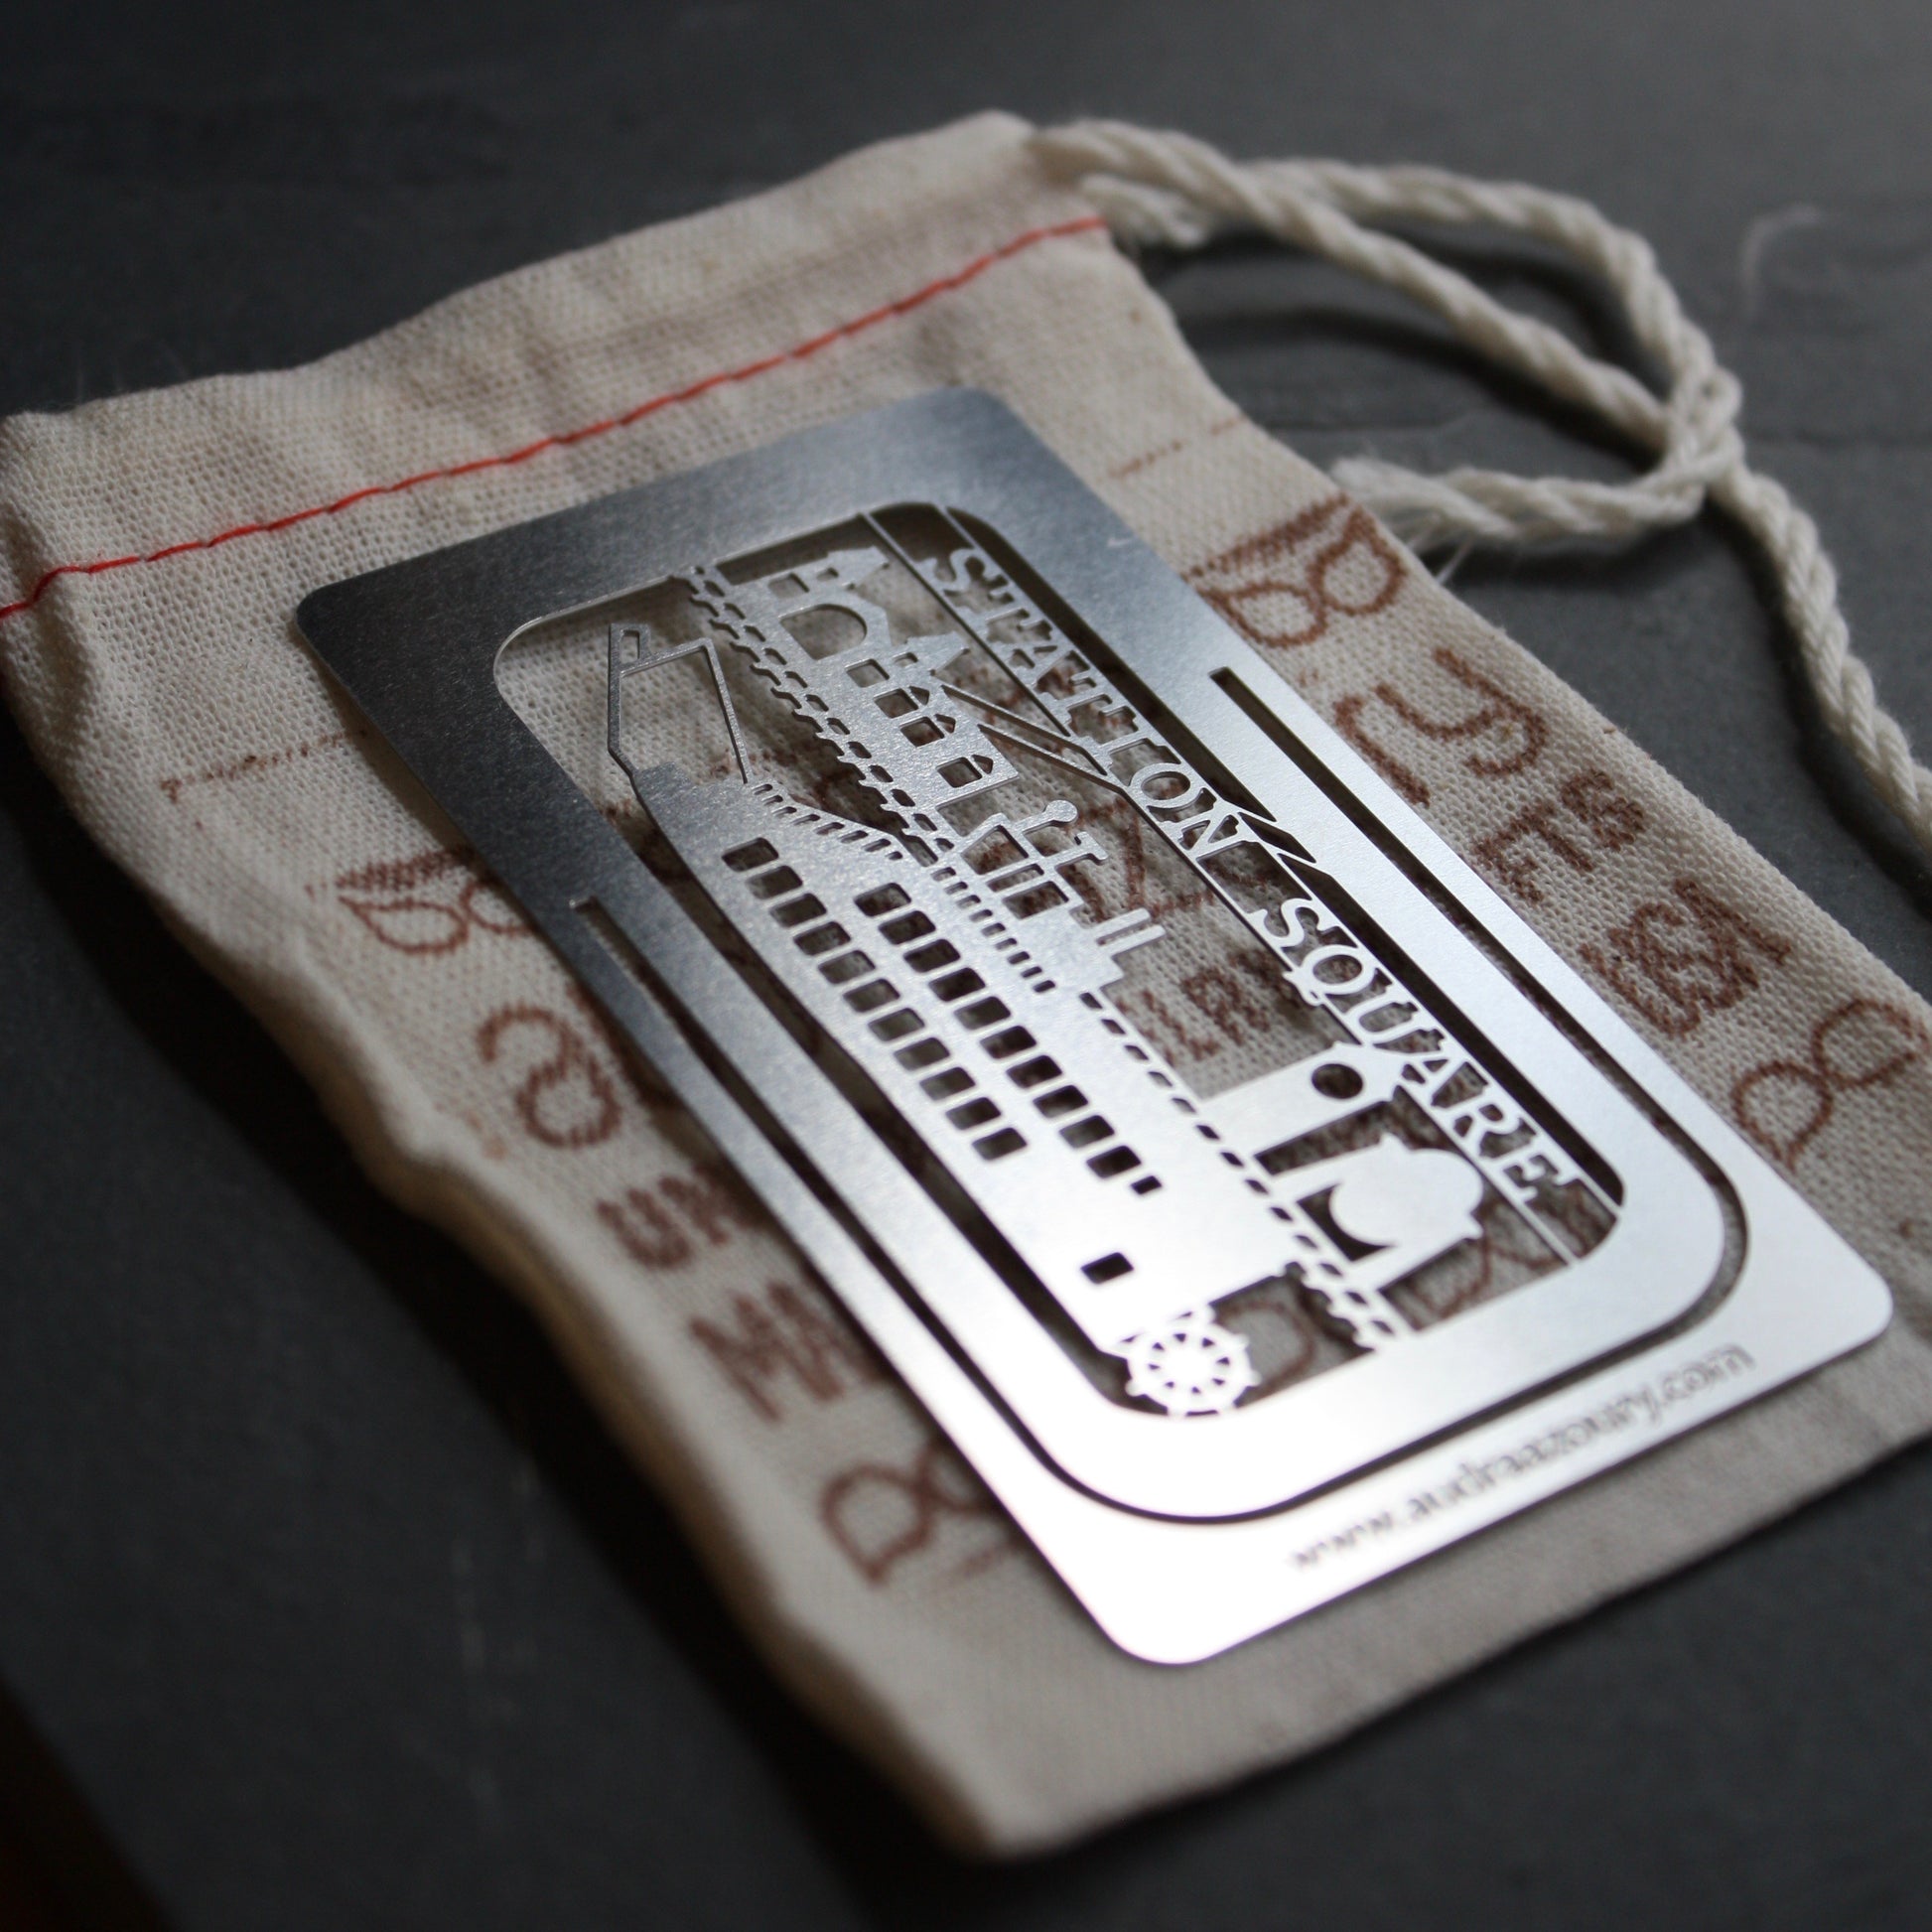 Station Square bookmark by Pittsburgh artist Audra Azoury